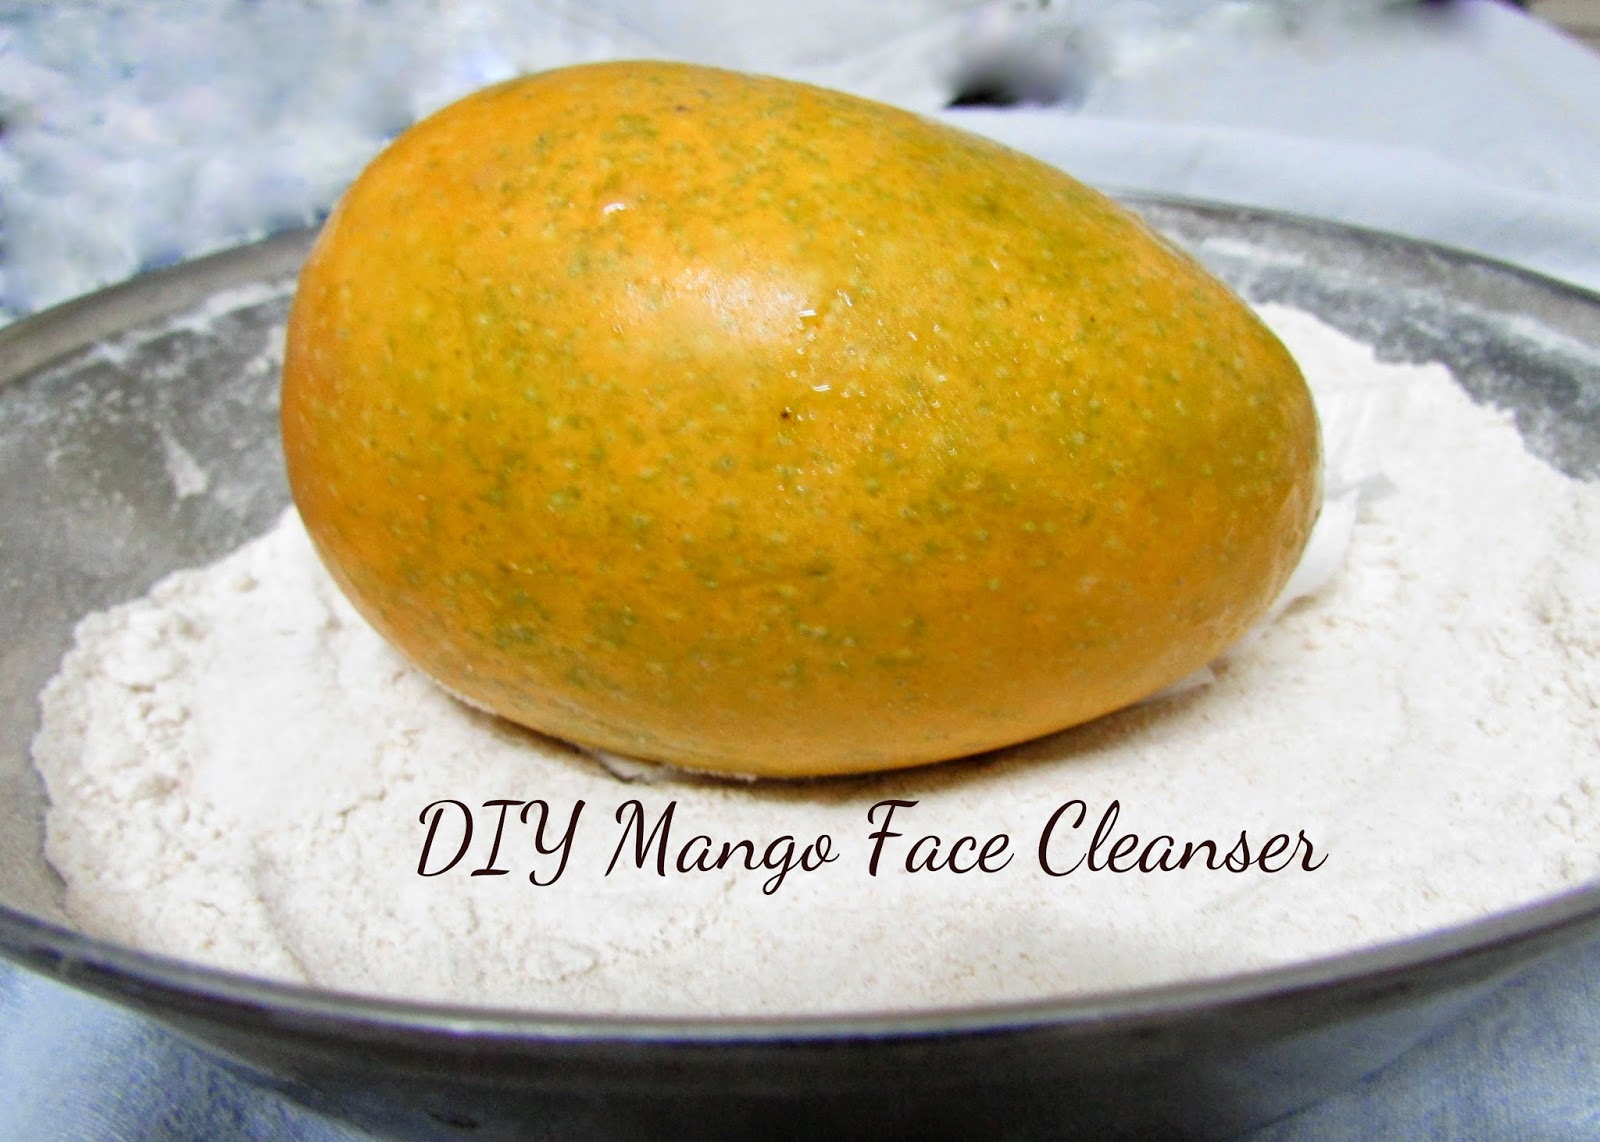 face pack , pack , mango , mango pack , mago gace pack , benifits of mango , skin benifits of mango , hair benifits of mango , DIY , DIY cleanser , clean , cleanser recire , how to make face wash , how to make face pack , how to make face cleanser, mango revipies , how to use mango for skin , how to use mango for hair , how to use mango for as face back , how to make mango face pack 